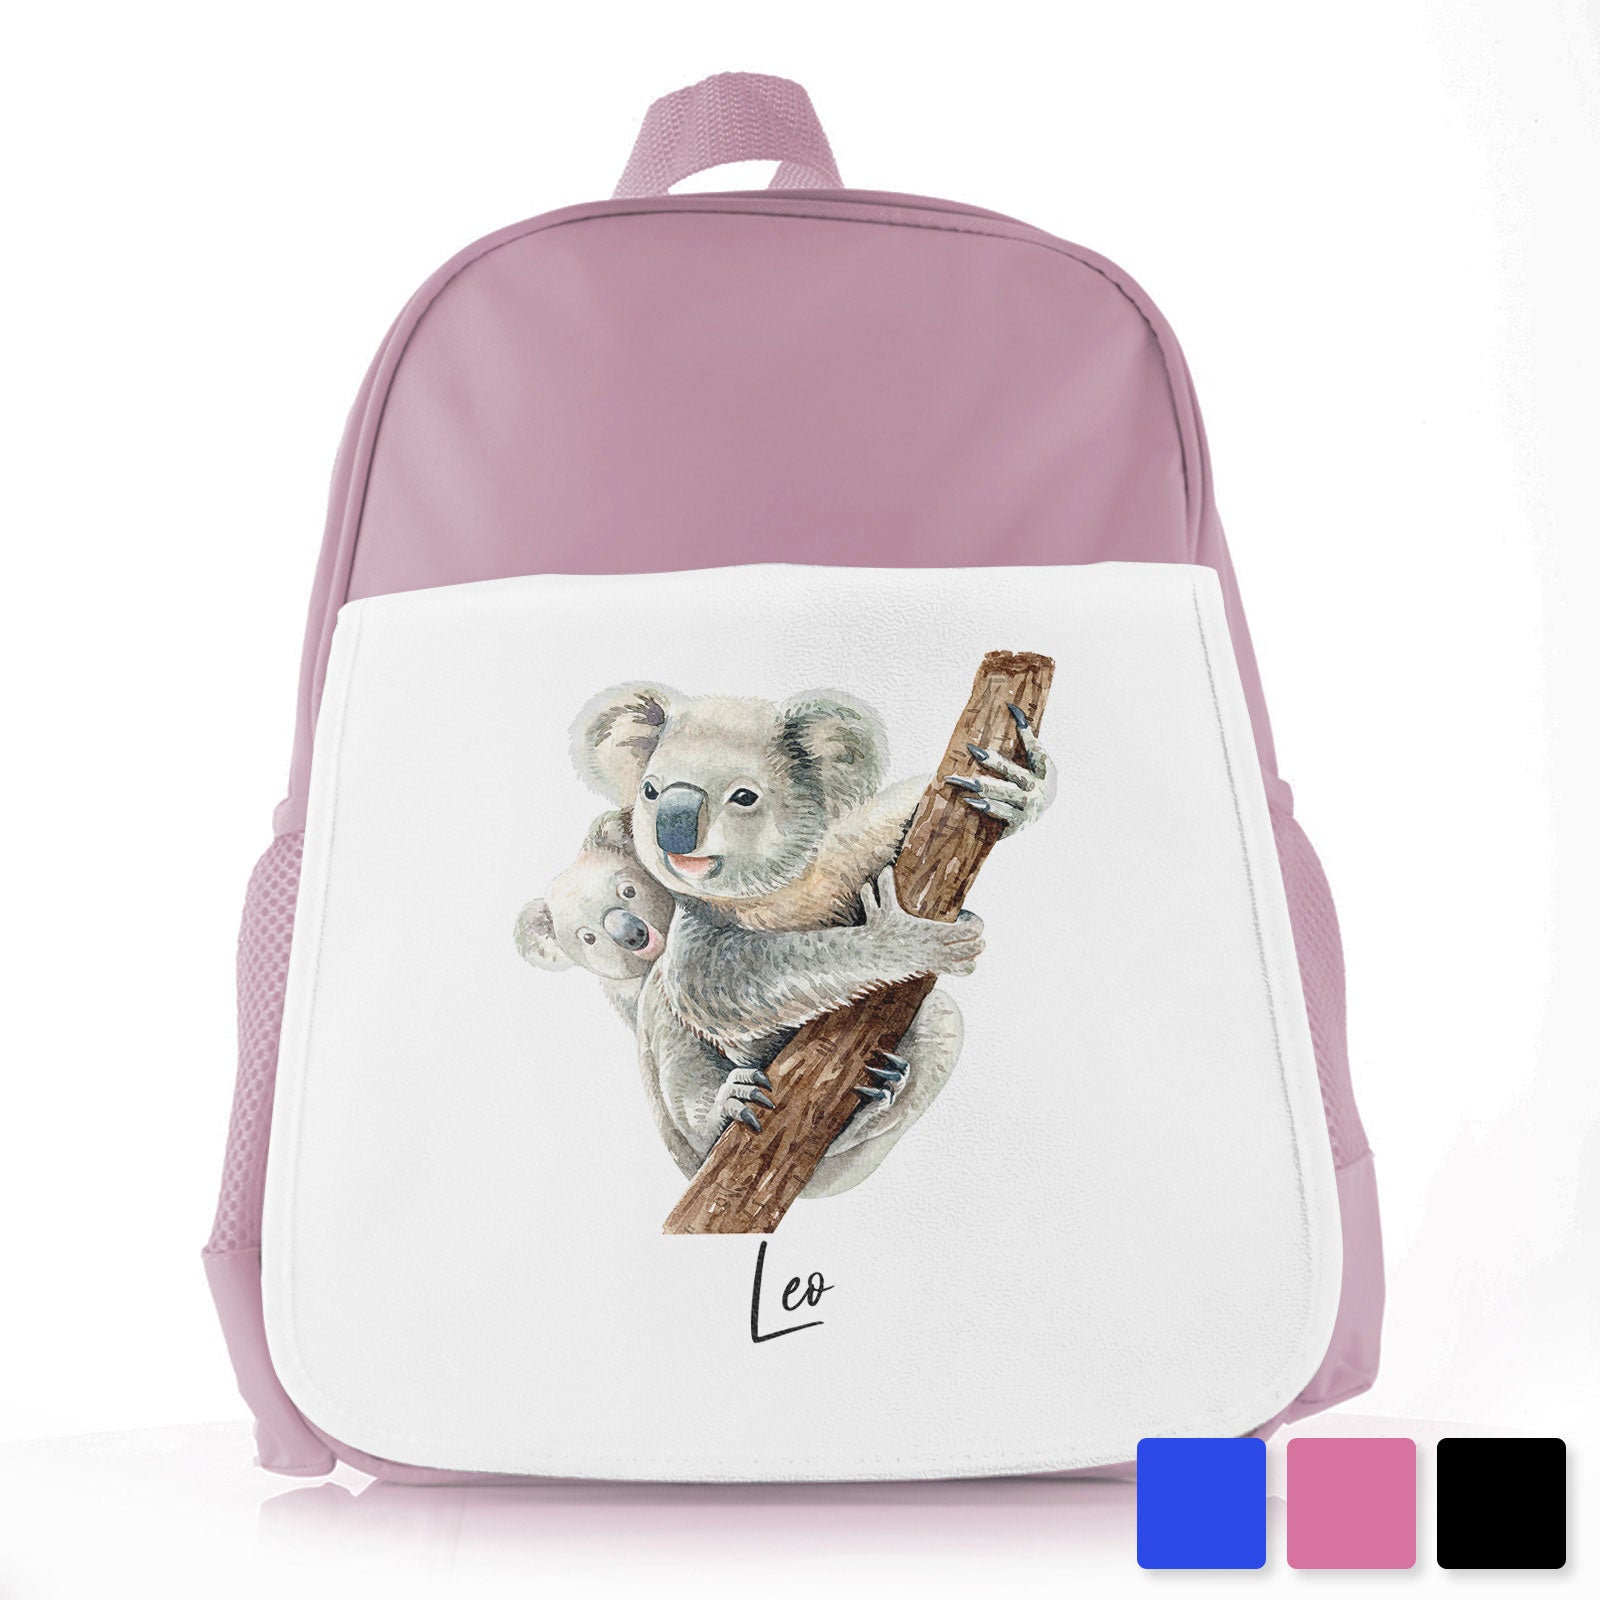 Personalised School Bag/Rucksack with Welcoming Text and Climbing Mum and Baby Koalas